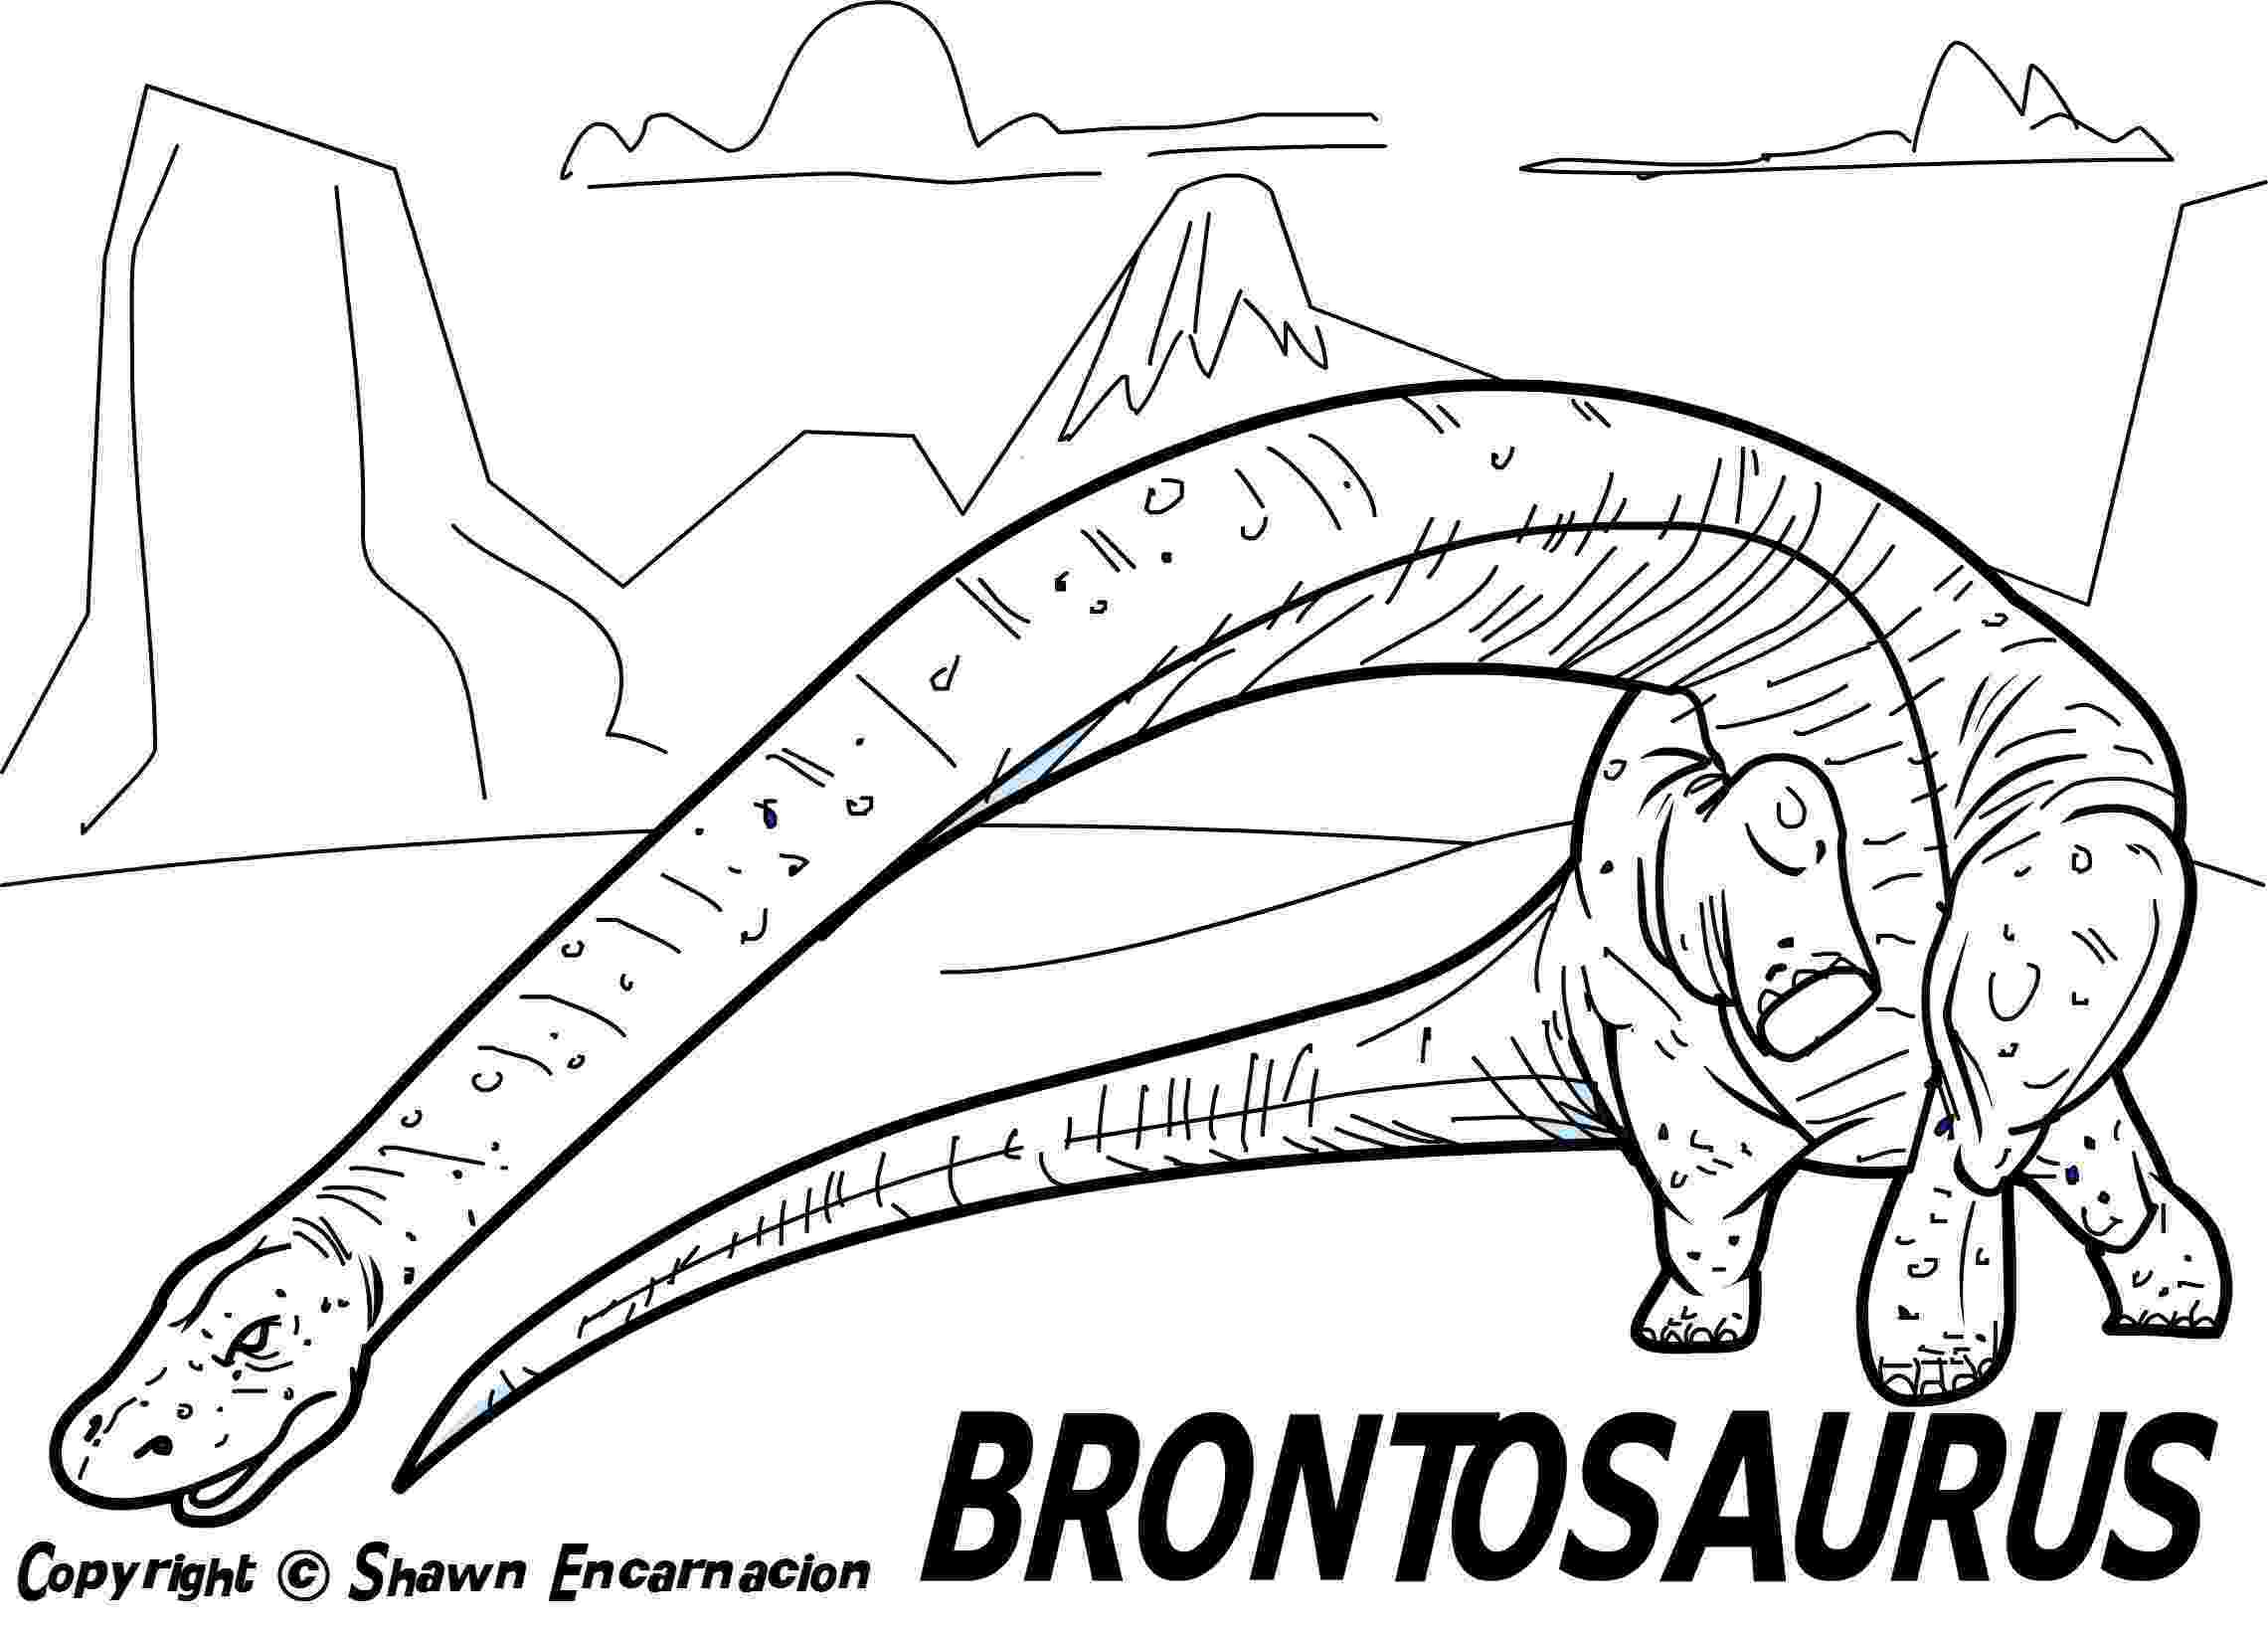 dinosaur color page dinosaurs to download ba dinosaurs kids coloring pages dinosaur color page 